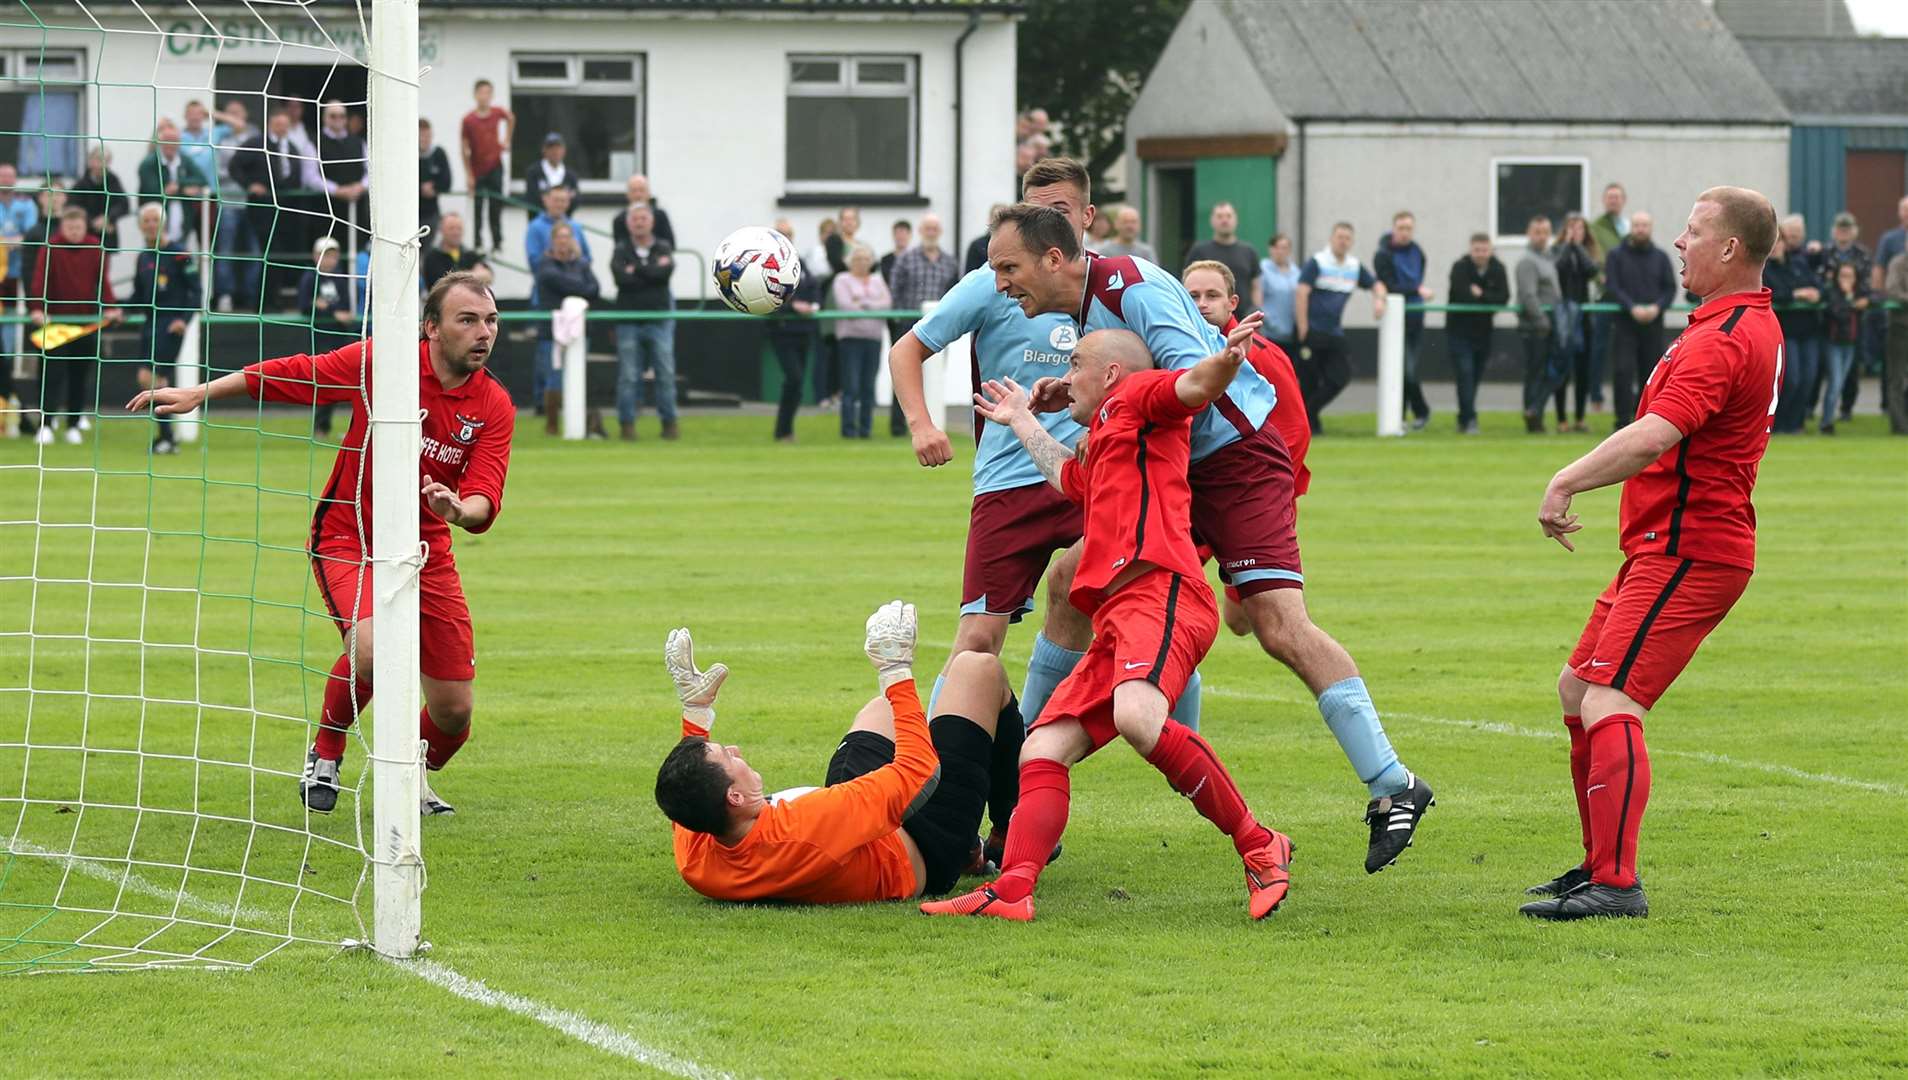 Shaun Forbes head in a dramatic 98th minute equaliser for Pentland United to make it 2-2 after being 2-0 down. However, their joy was short-lived as Wick Groats knocked them out 5-3 on penalties. Picture: James Gunn